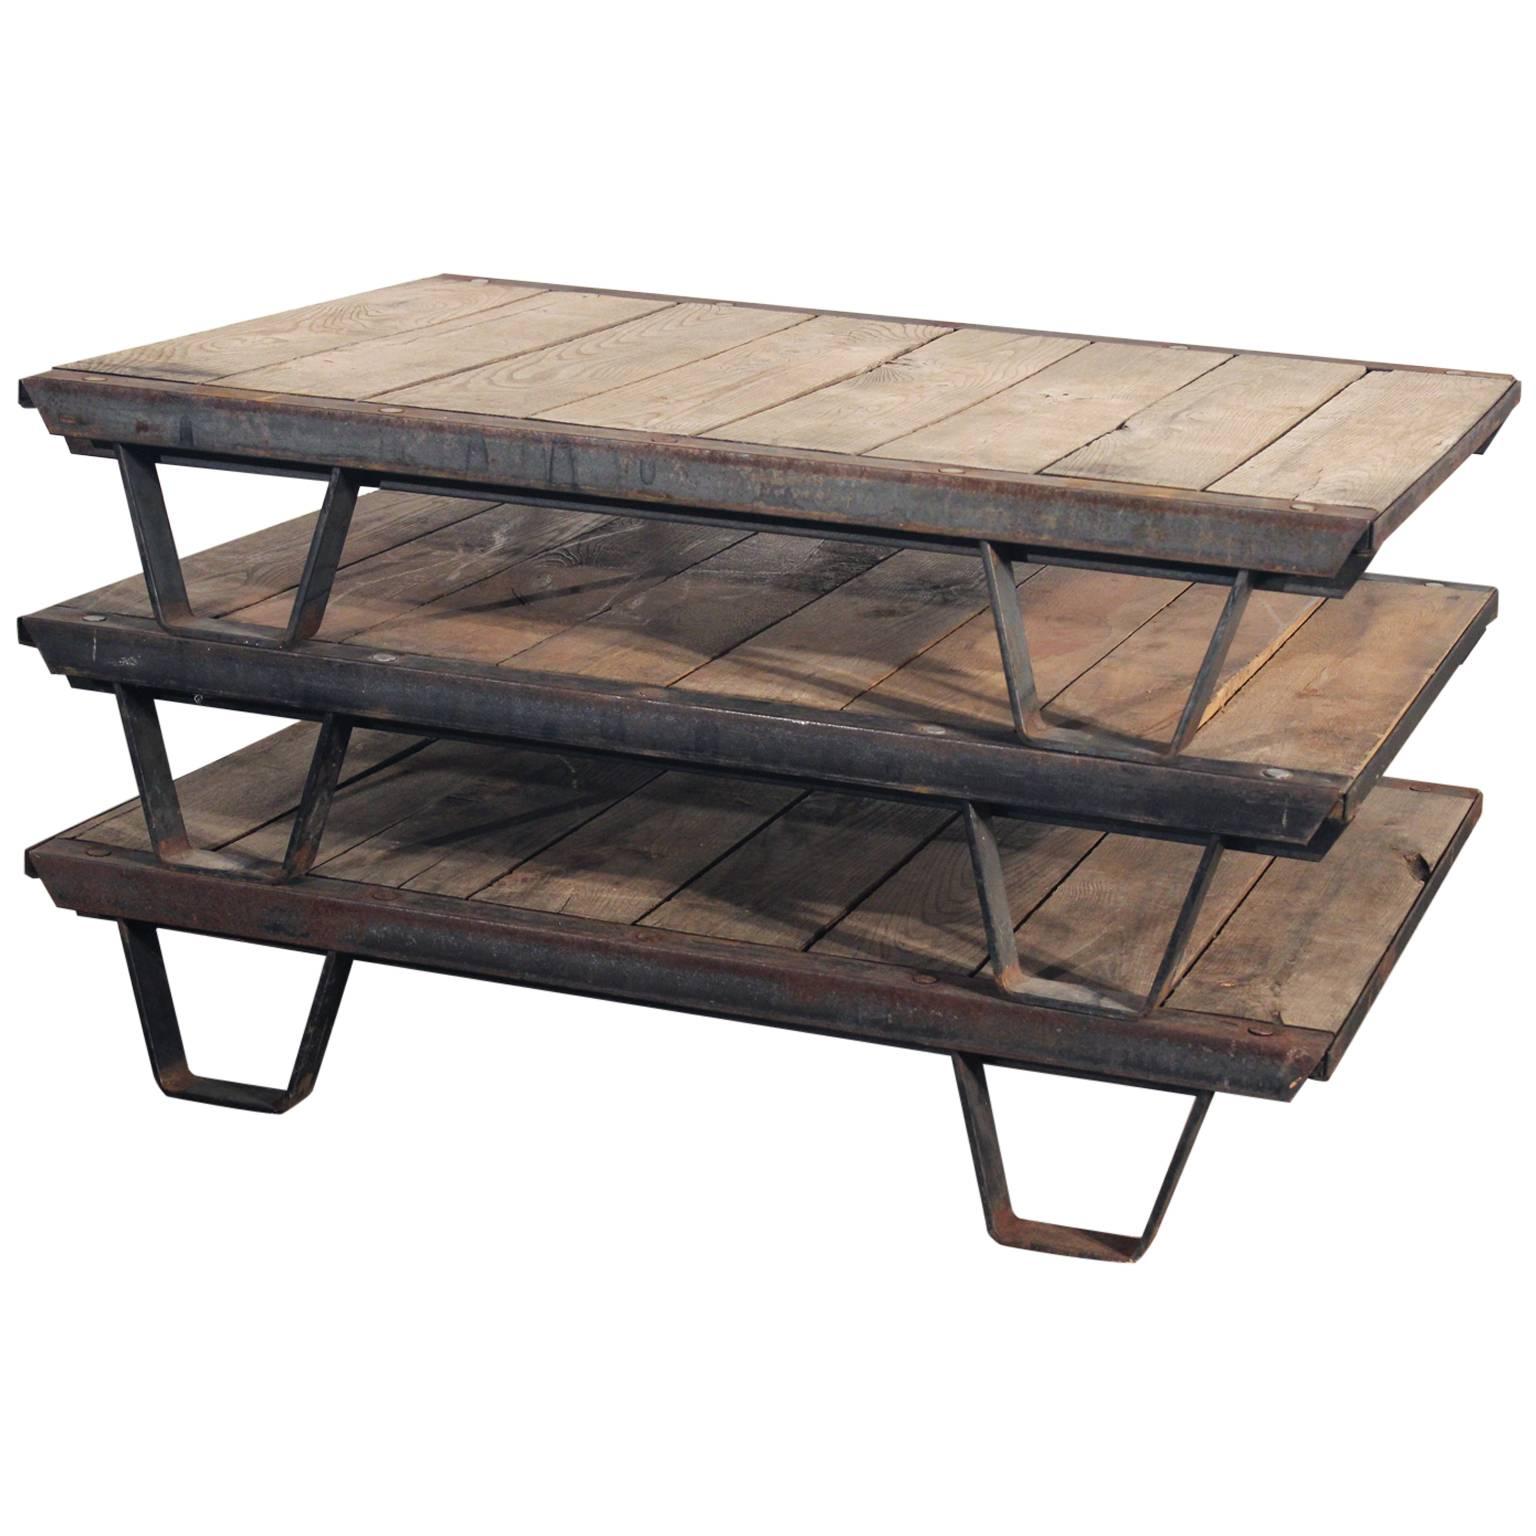 1930s Industrial Wooden Pallets Iron Rustic Frame For Sale